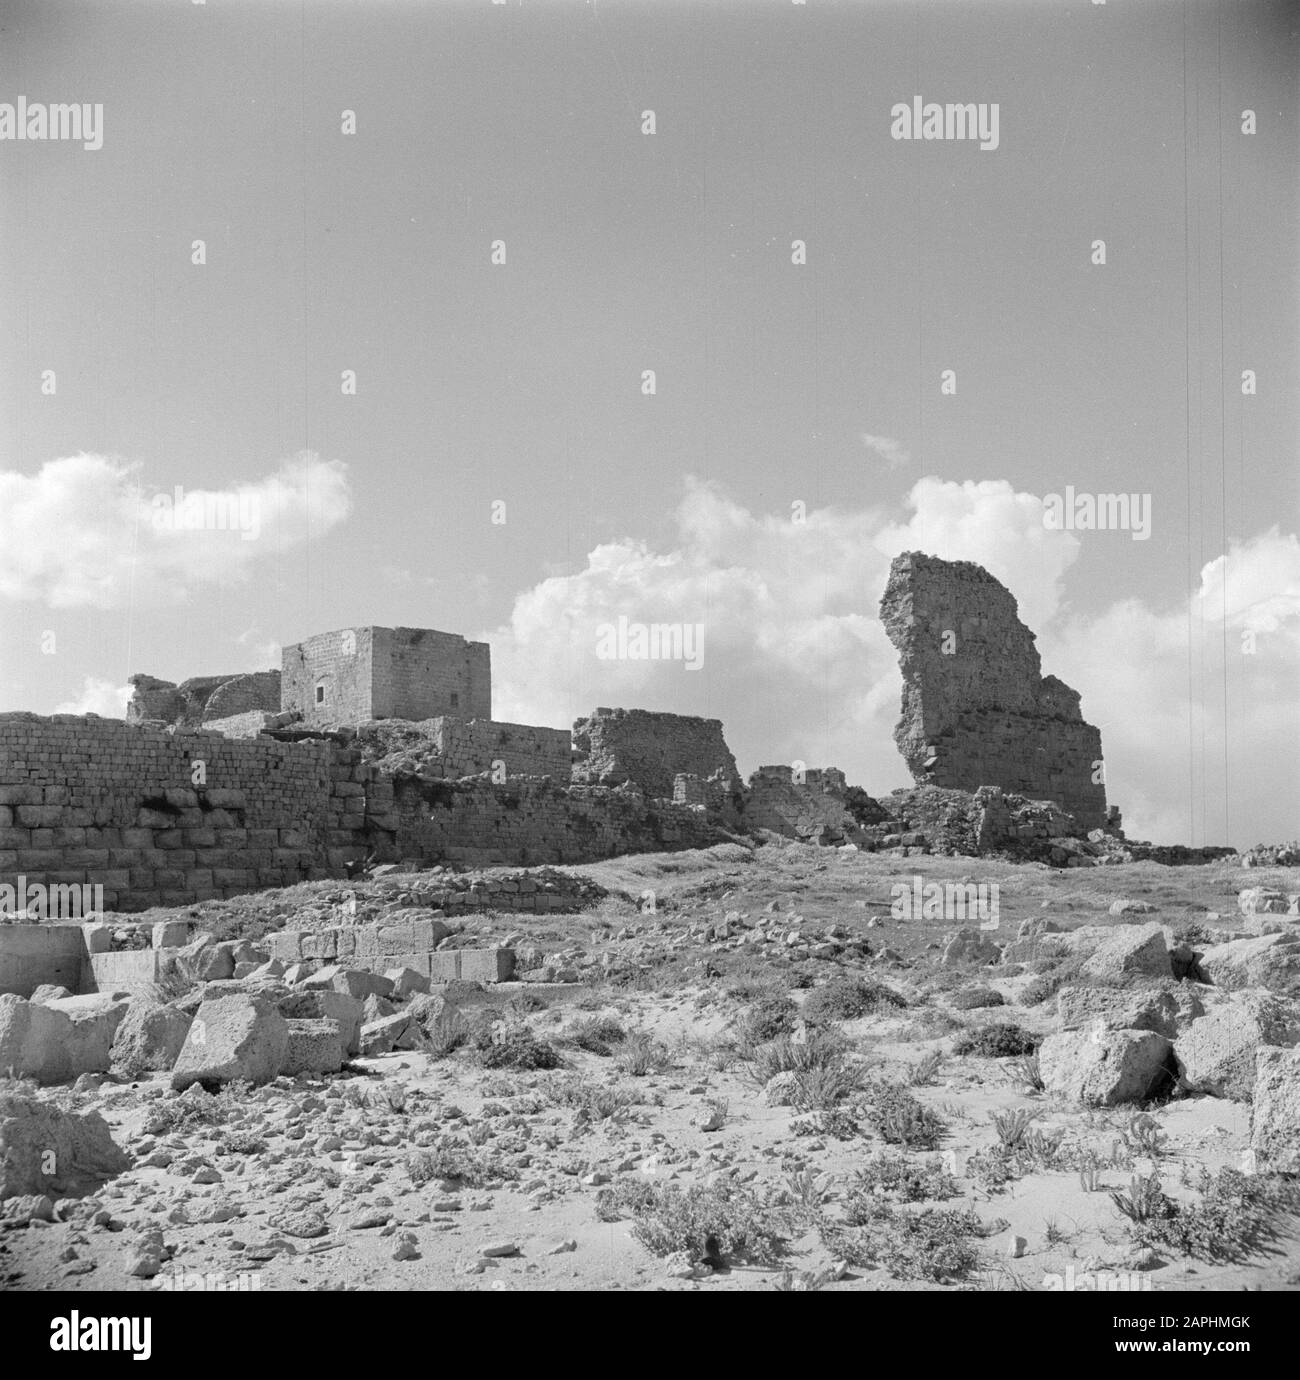 Israel 1948-1949:atlit Description: The coastal strip near Atlit near Haifa with the ruin of a castle from the time of the crusaders on the beach Date: 1948 Location: Atlit, Israel, Mediterranean Sea Keywords: archeology, history, castles, crusaders, coasts, walls, knights, ruins, beaches Stock Photo